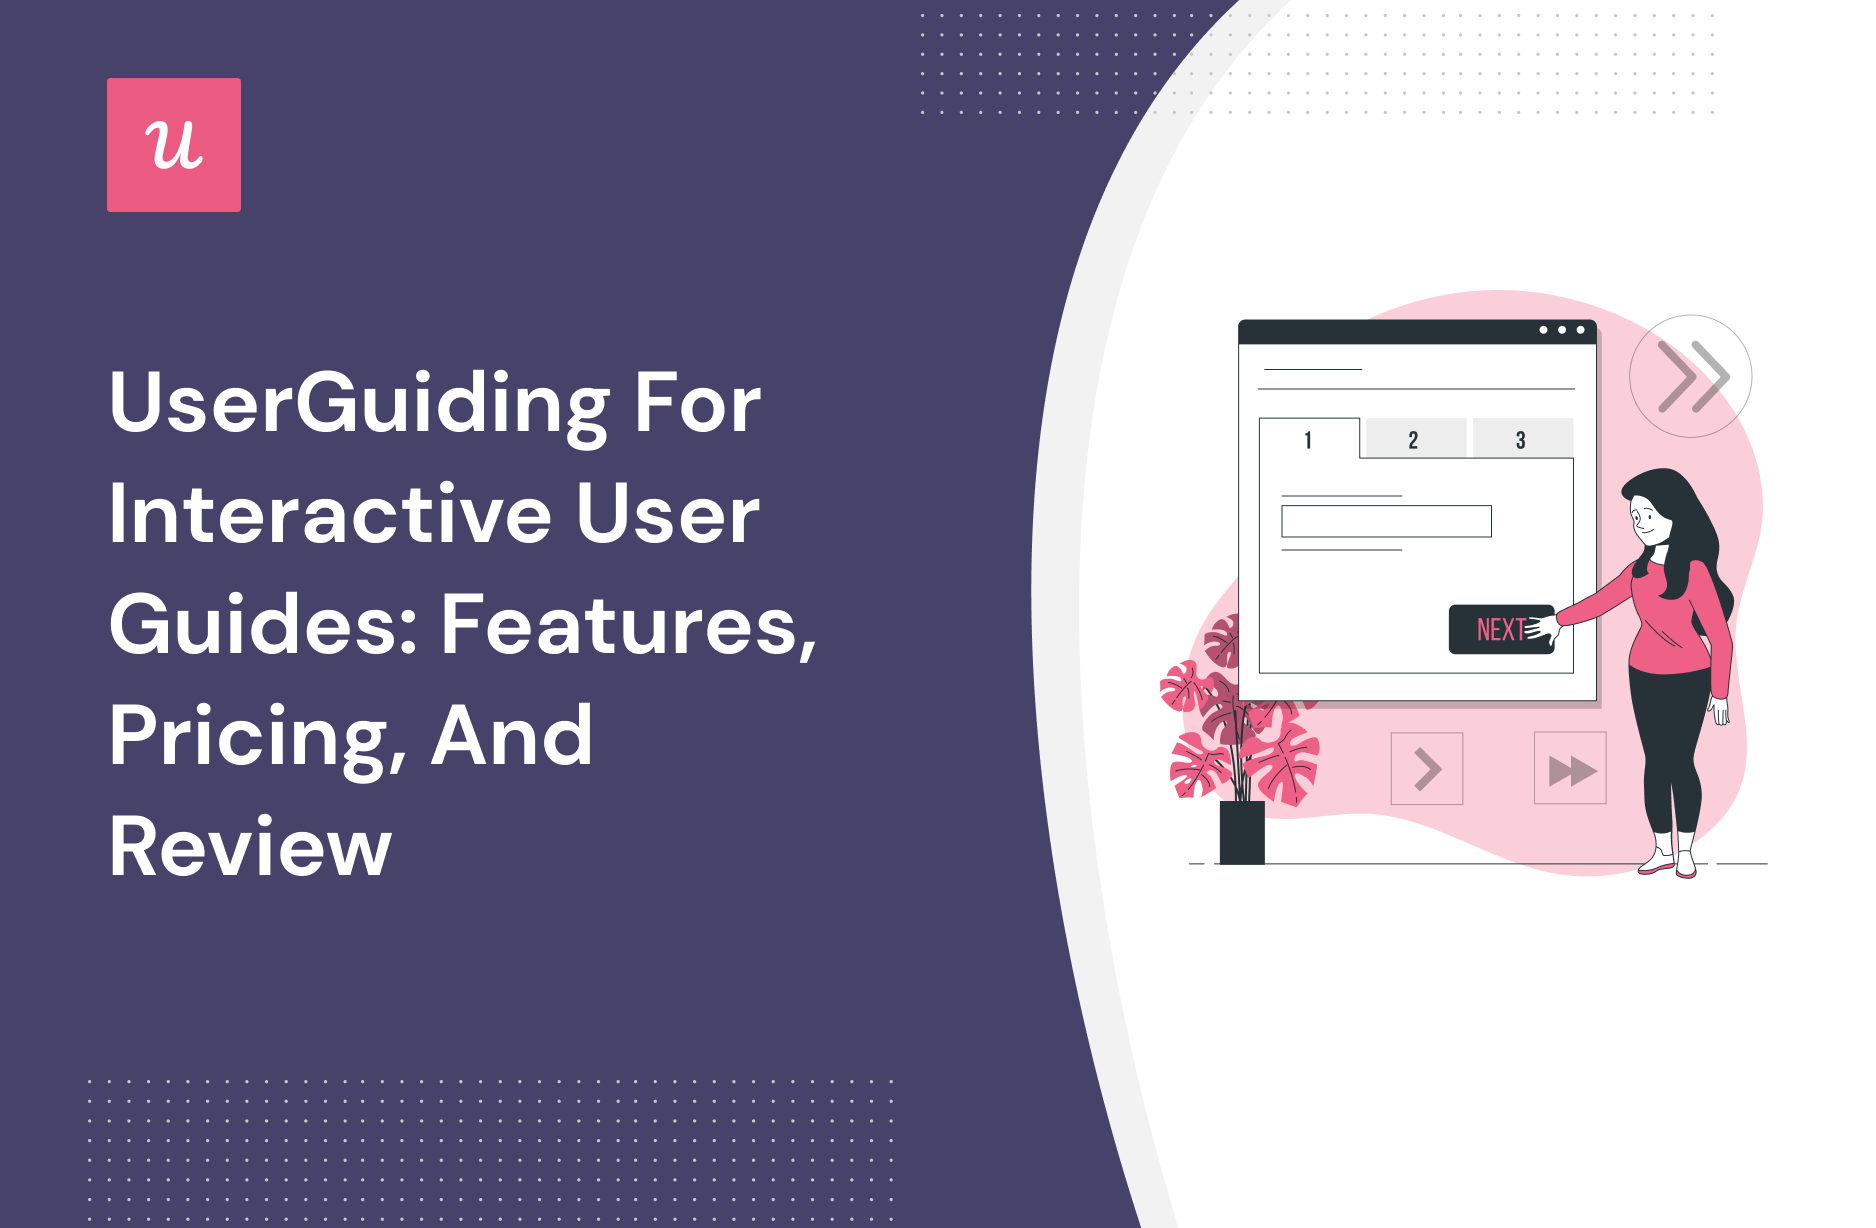 UserGuiding for Interactive User Guides: Features, Pricing, and Review